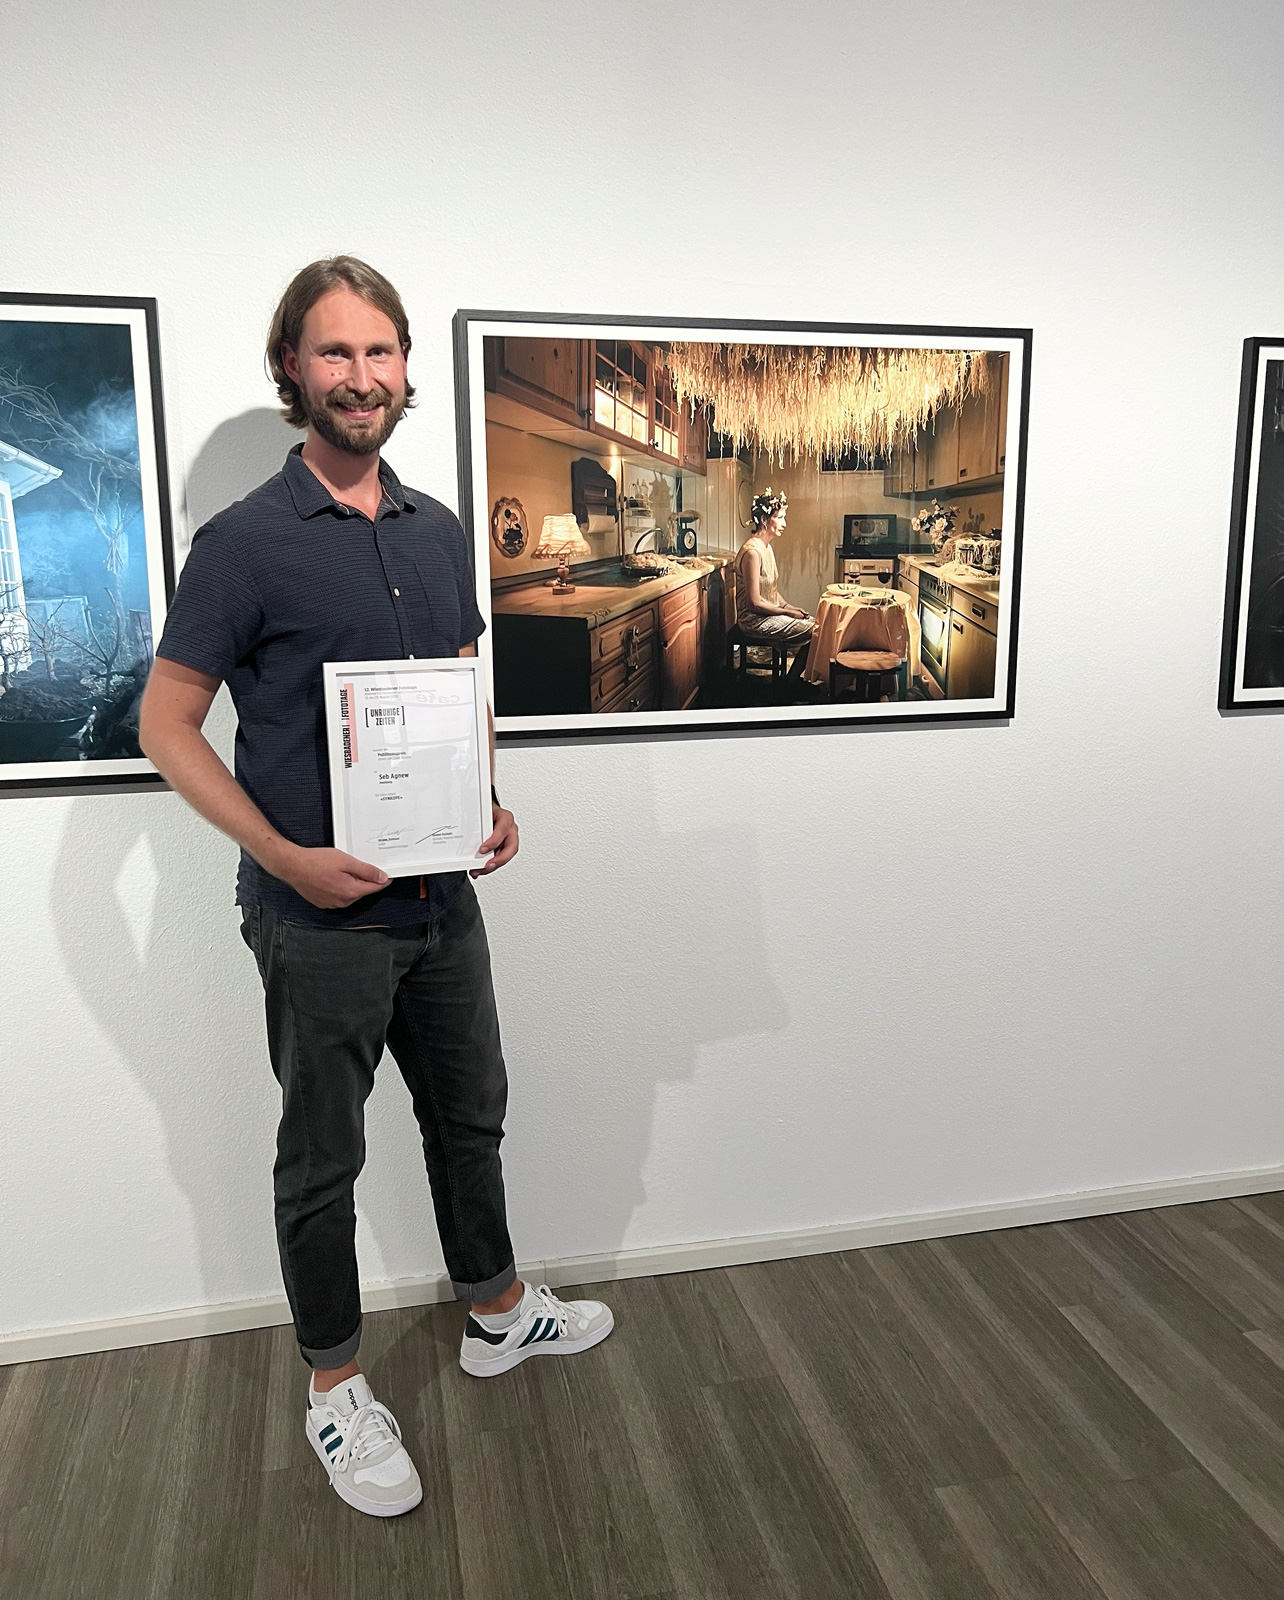 Seb Agnew winning the Audience Award at the Wiesbaden Photo Days